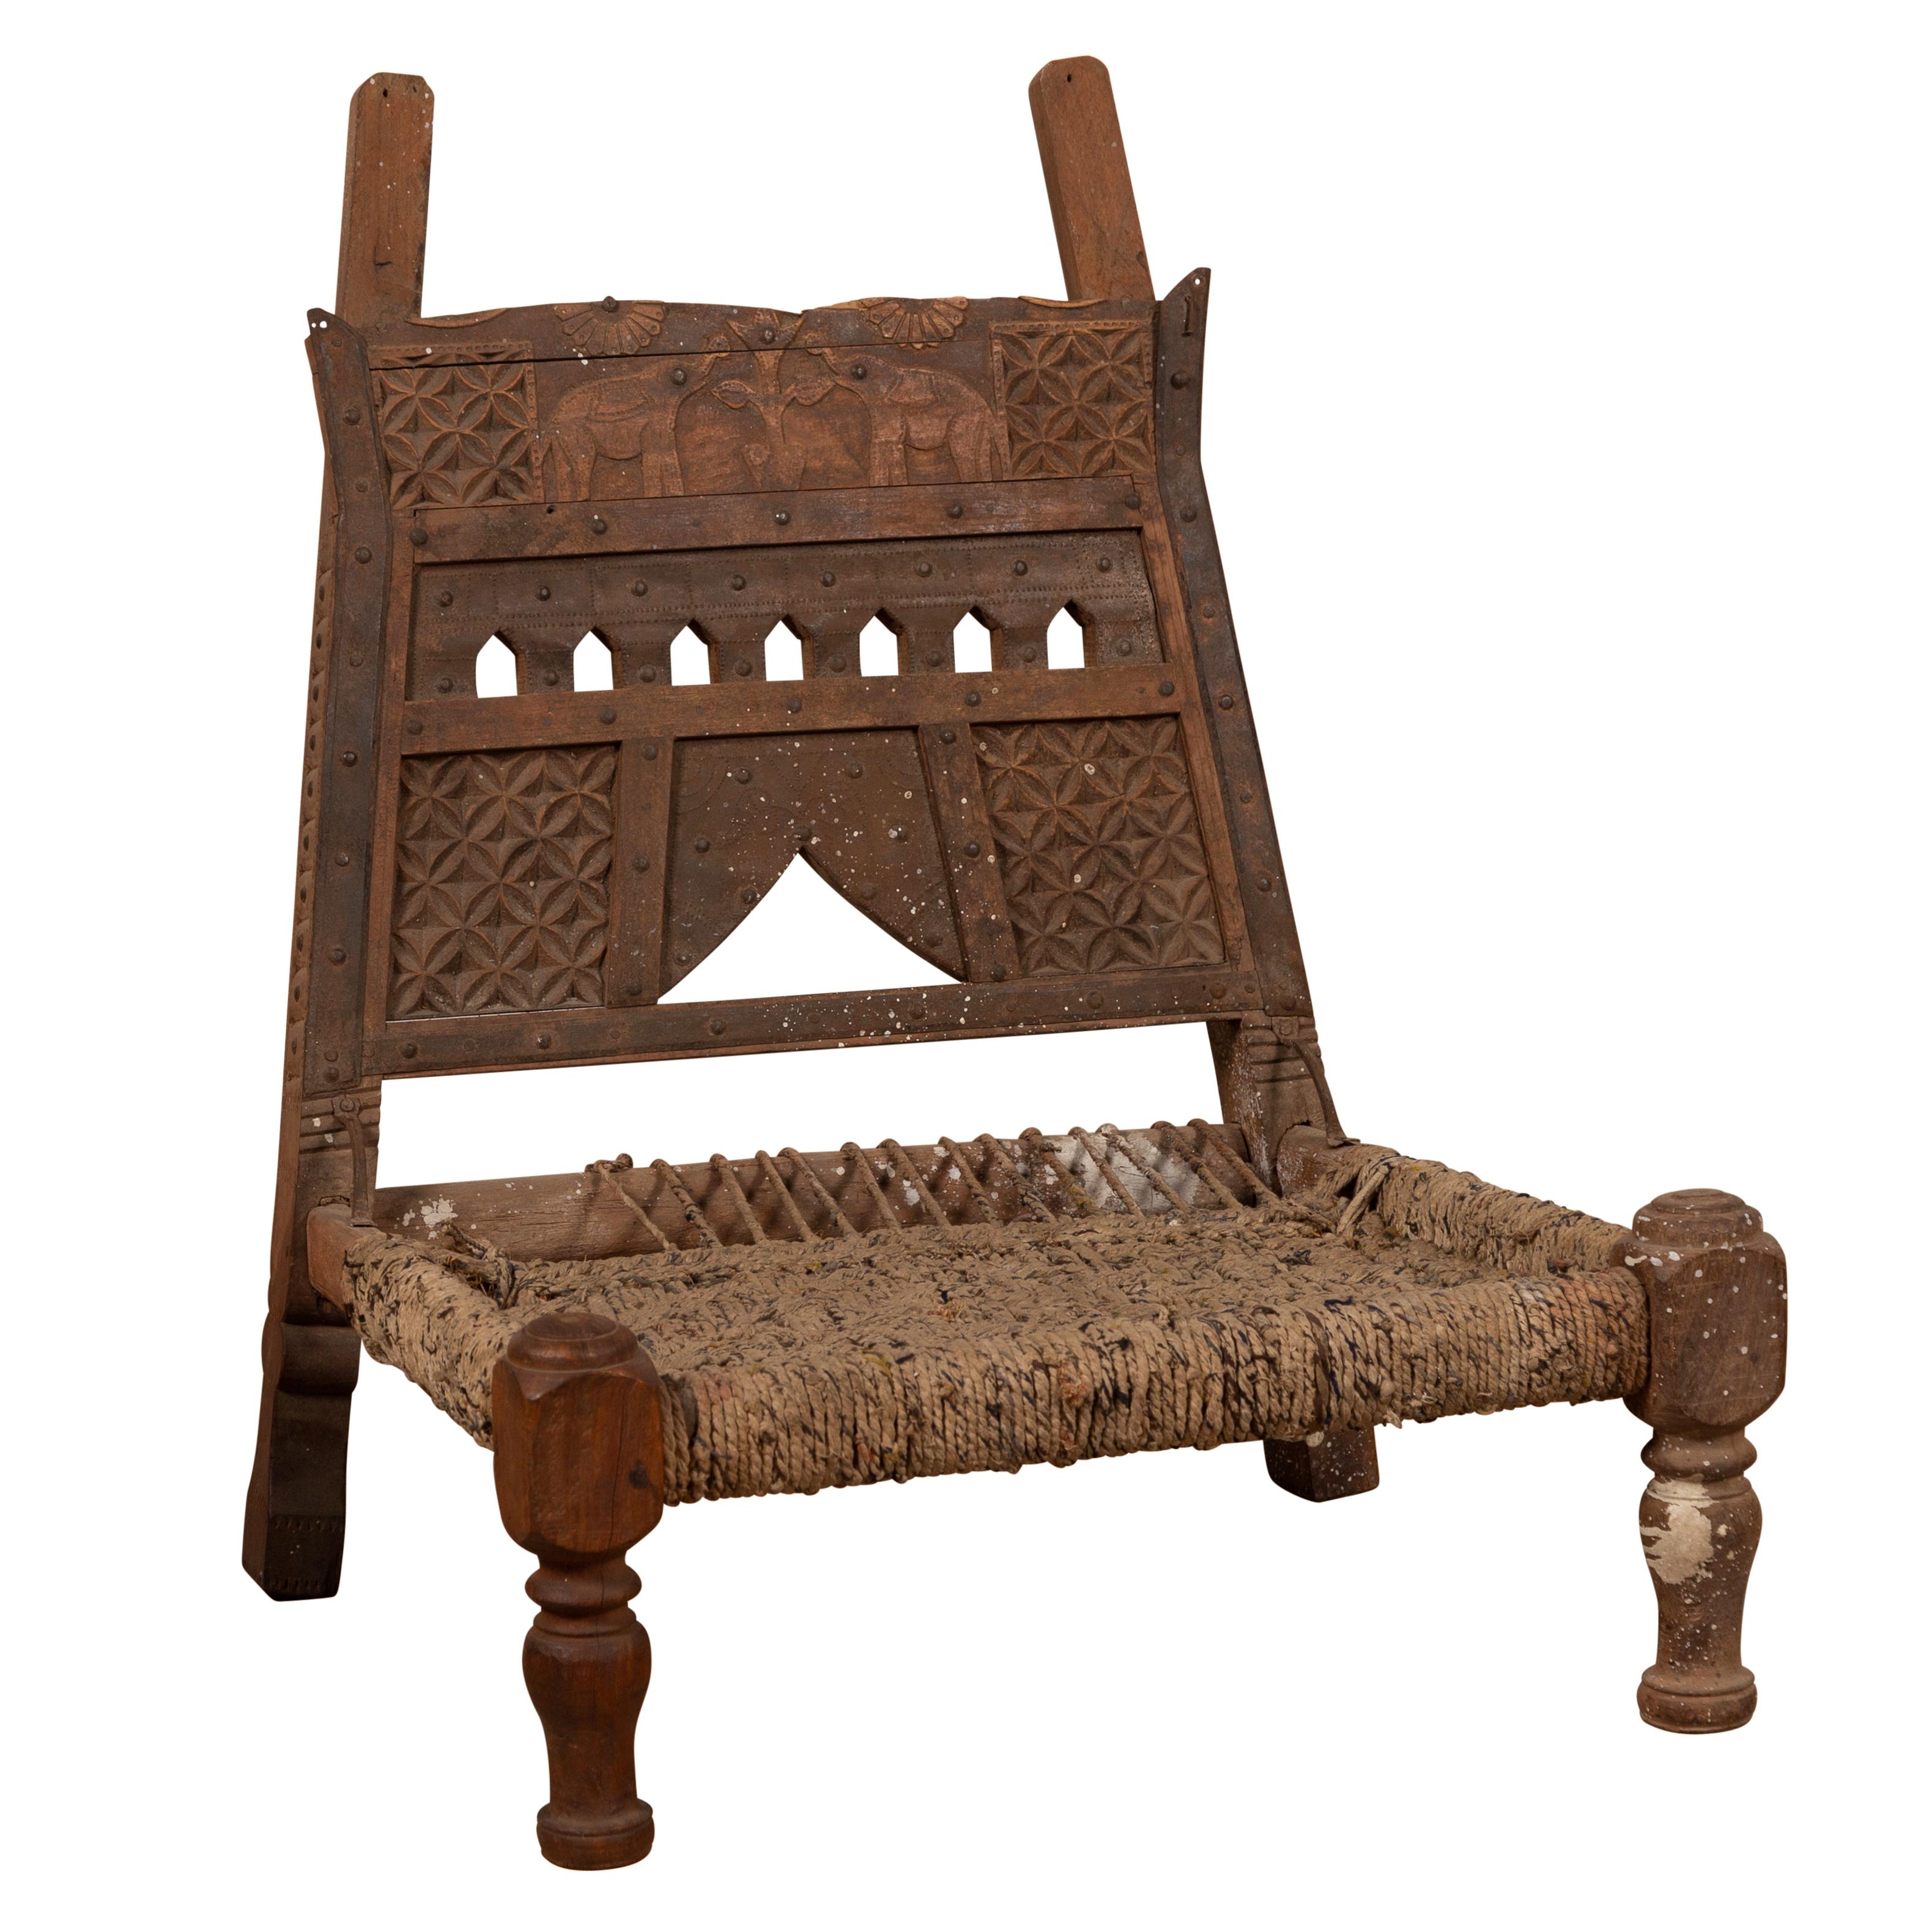 Rustic Indian Low Wooden Chair with Rope Seat and Weathered Appearance For Sale